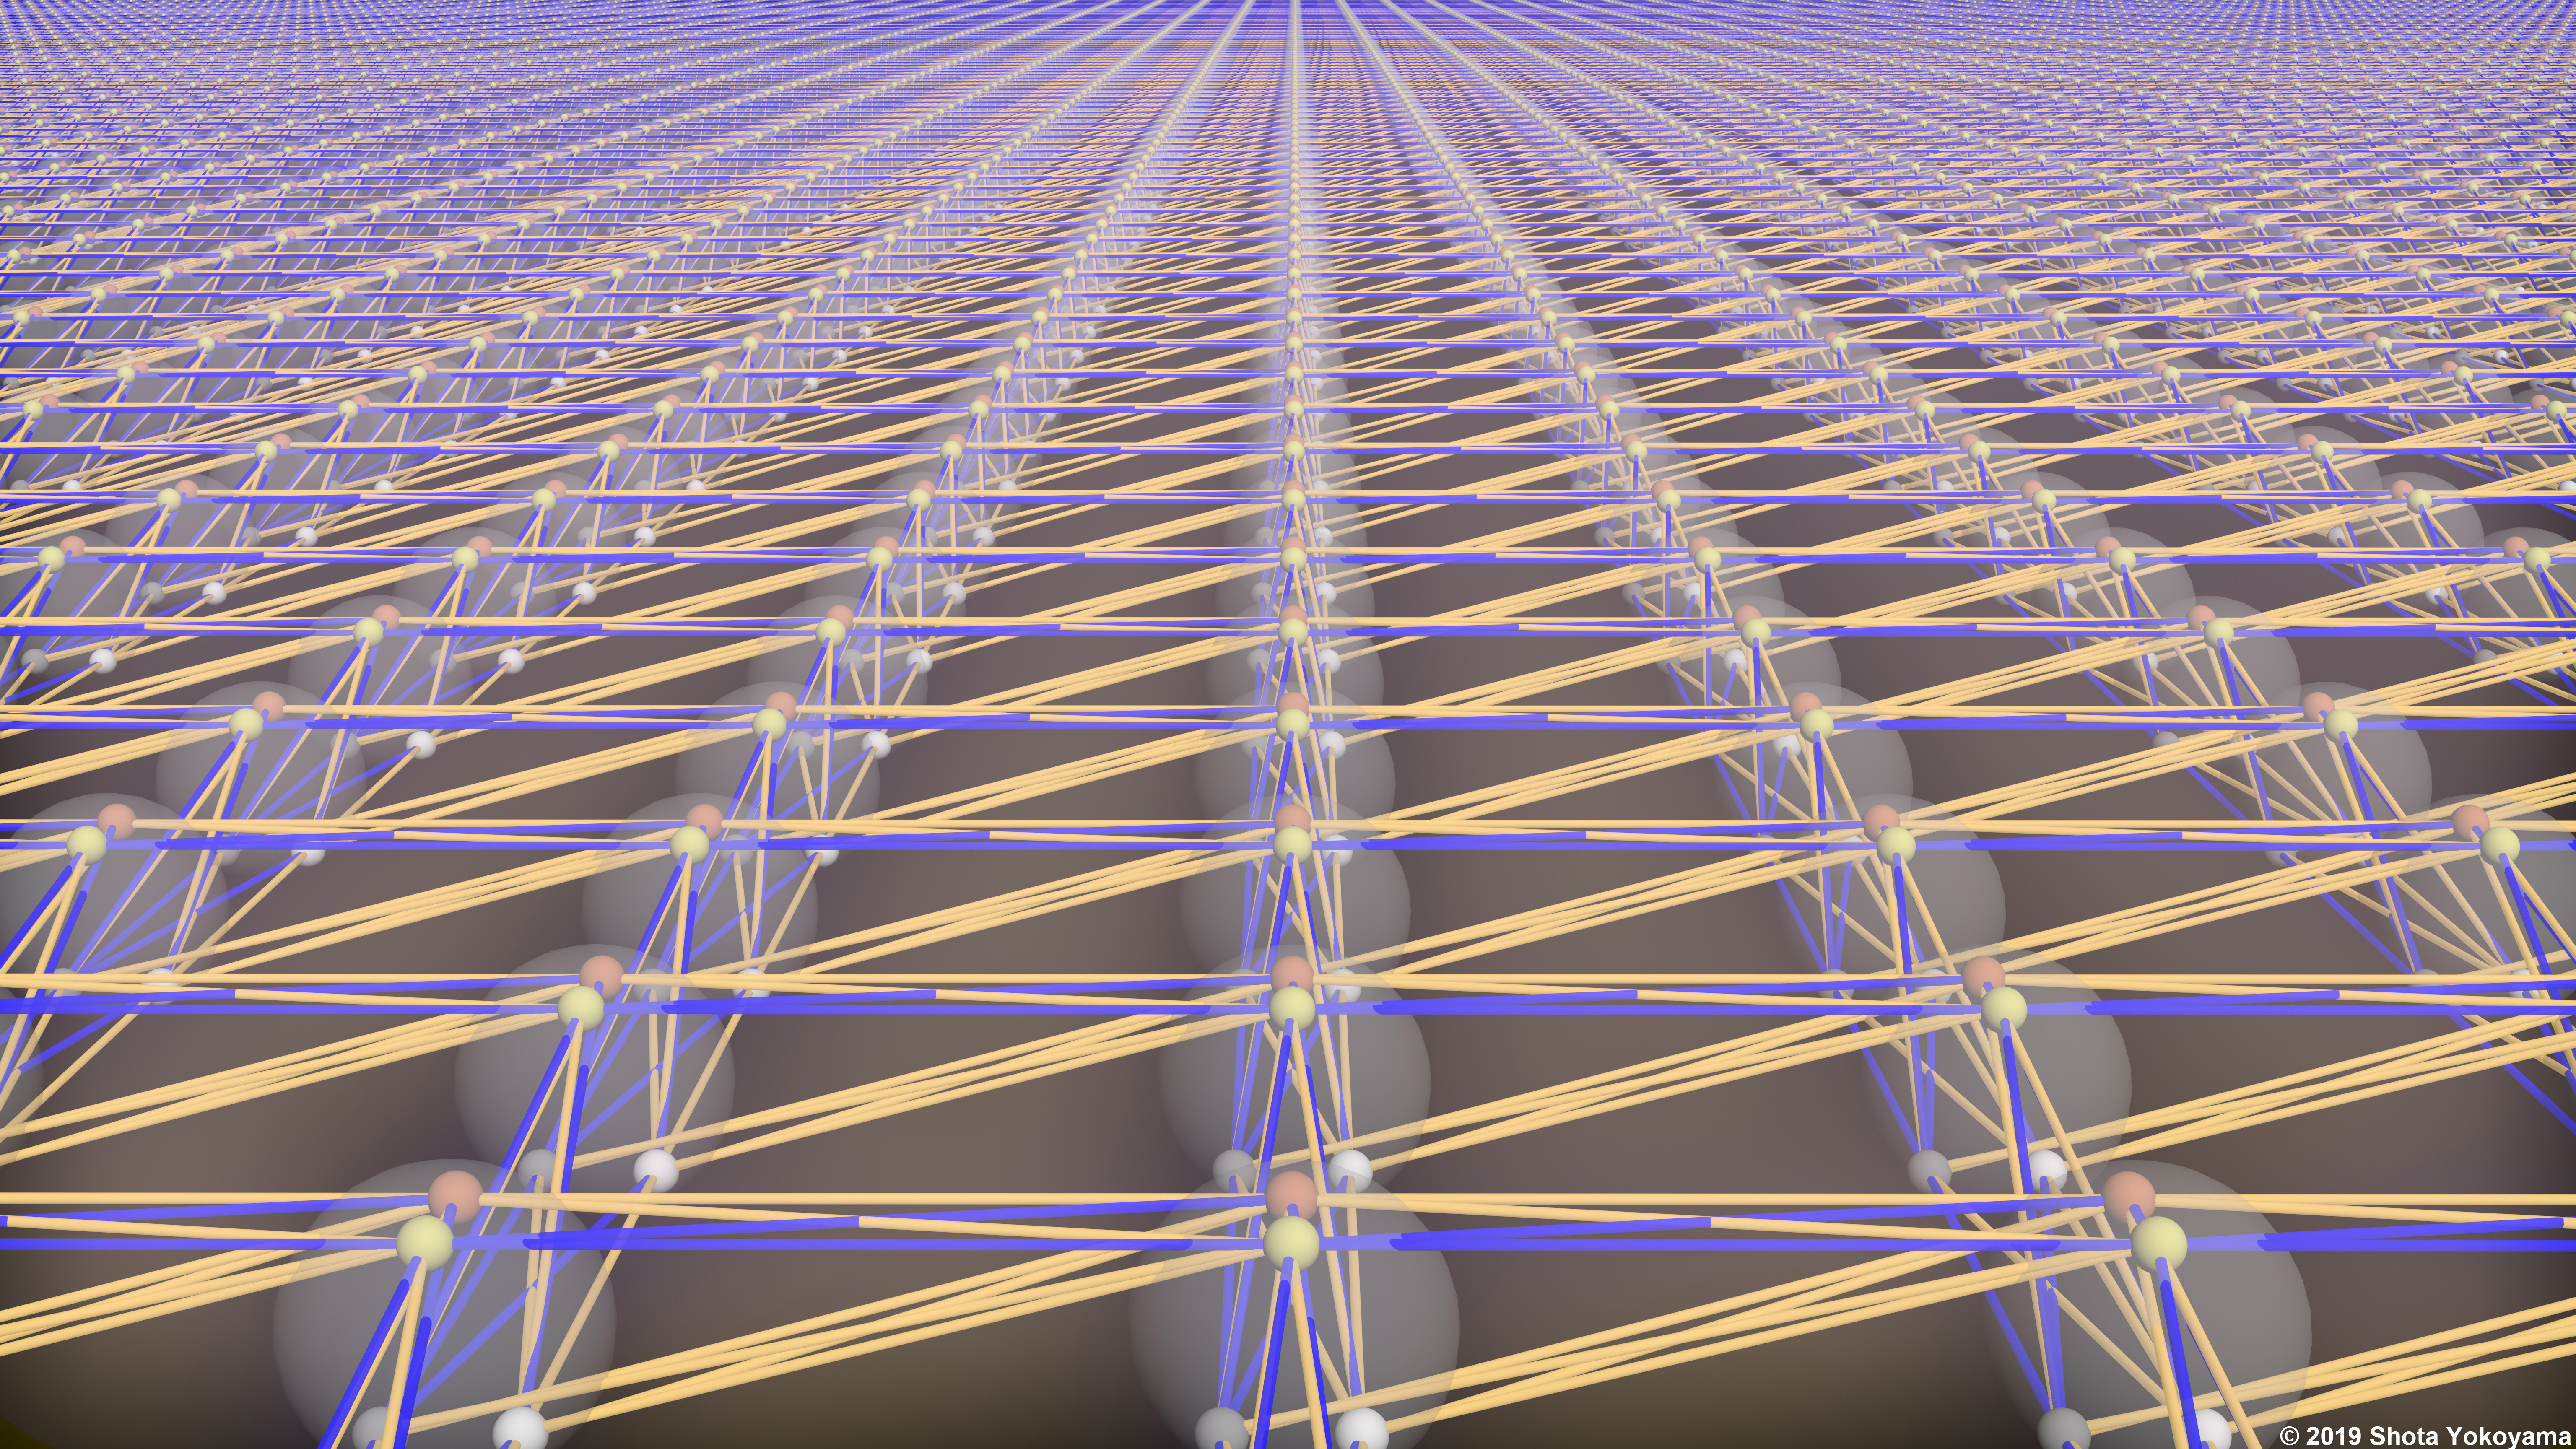 The entanglement structure of a large-scale quantum processor made of light. Credit: Shota Yokoyama 2019 